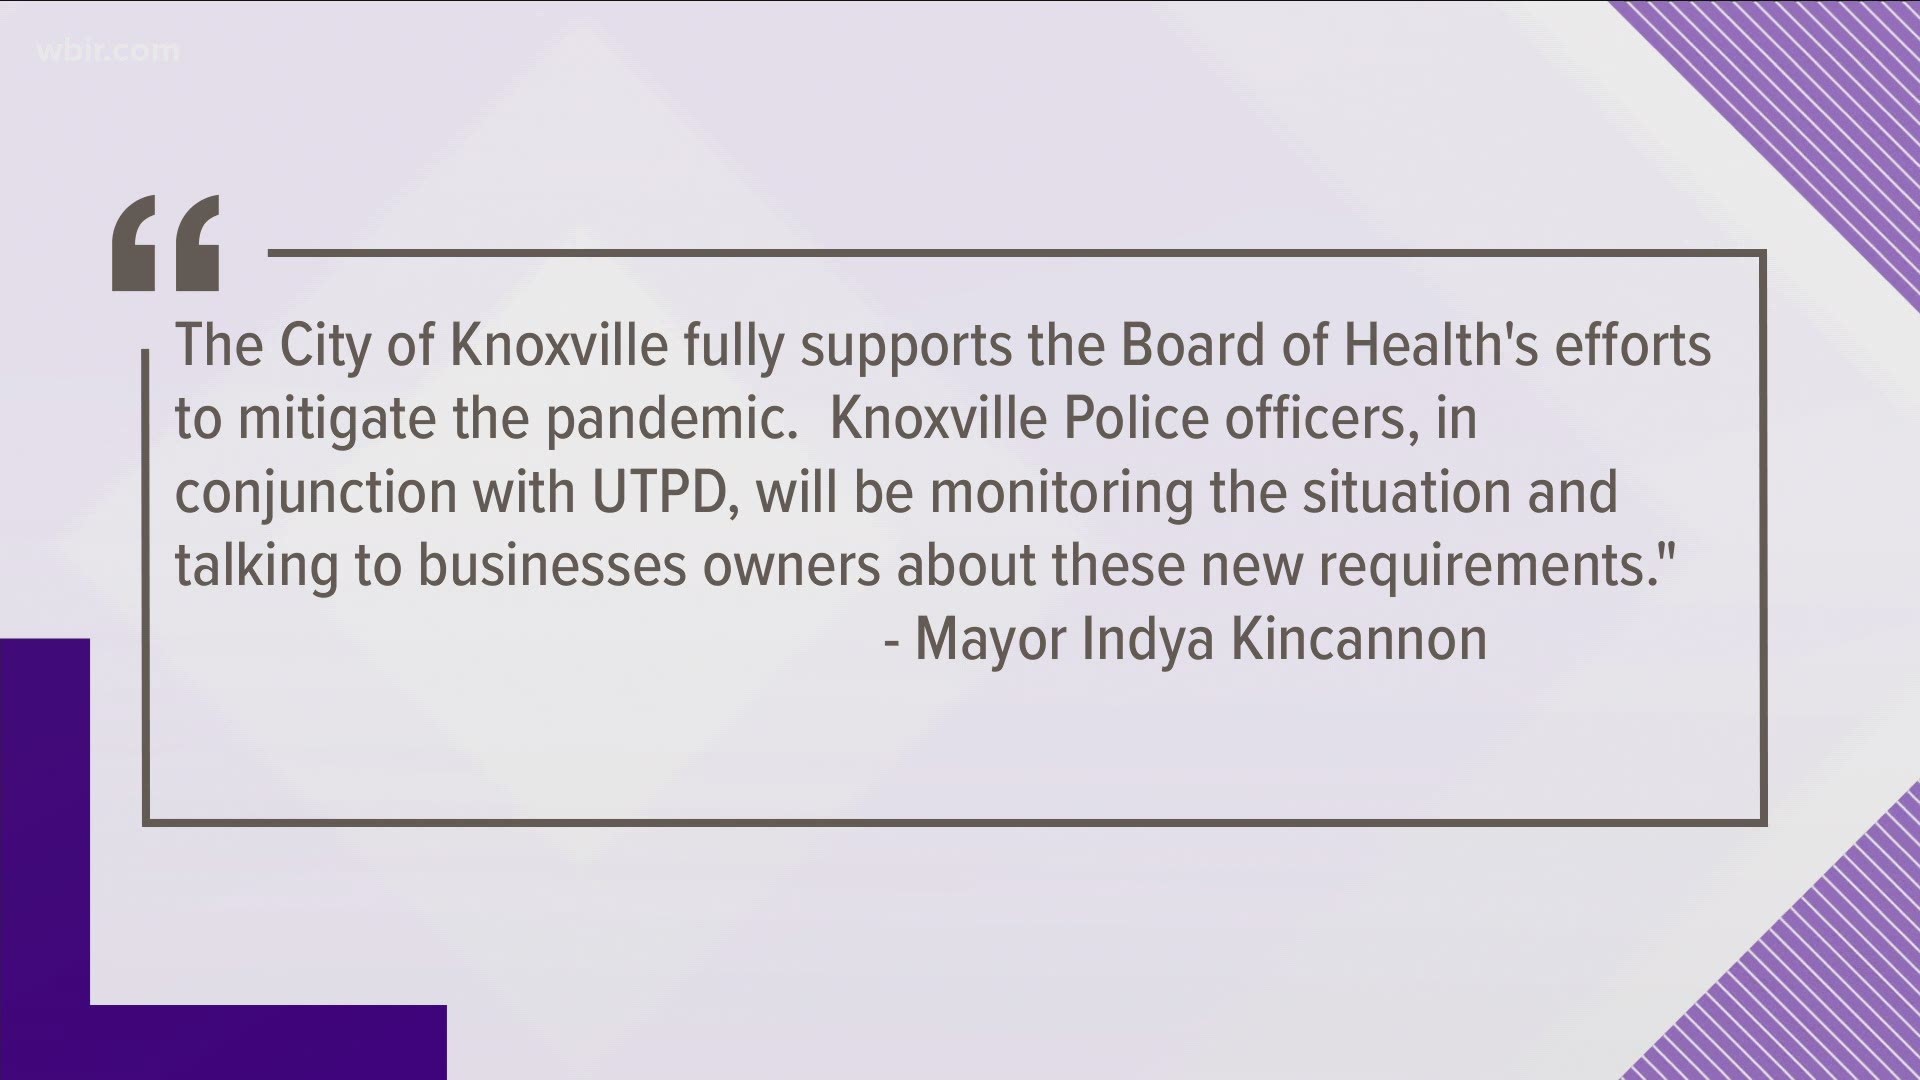 On Friday, Knoxville Mayor Indya Kincannon released a statement supporting the bar curfew from the Knox County Board of Health.